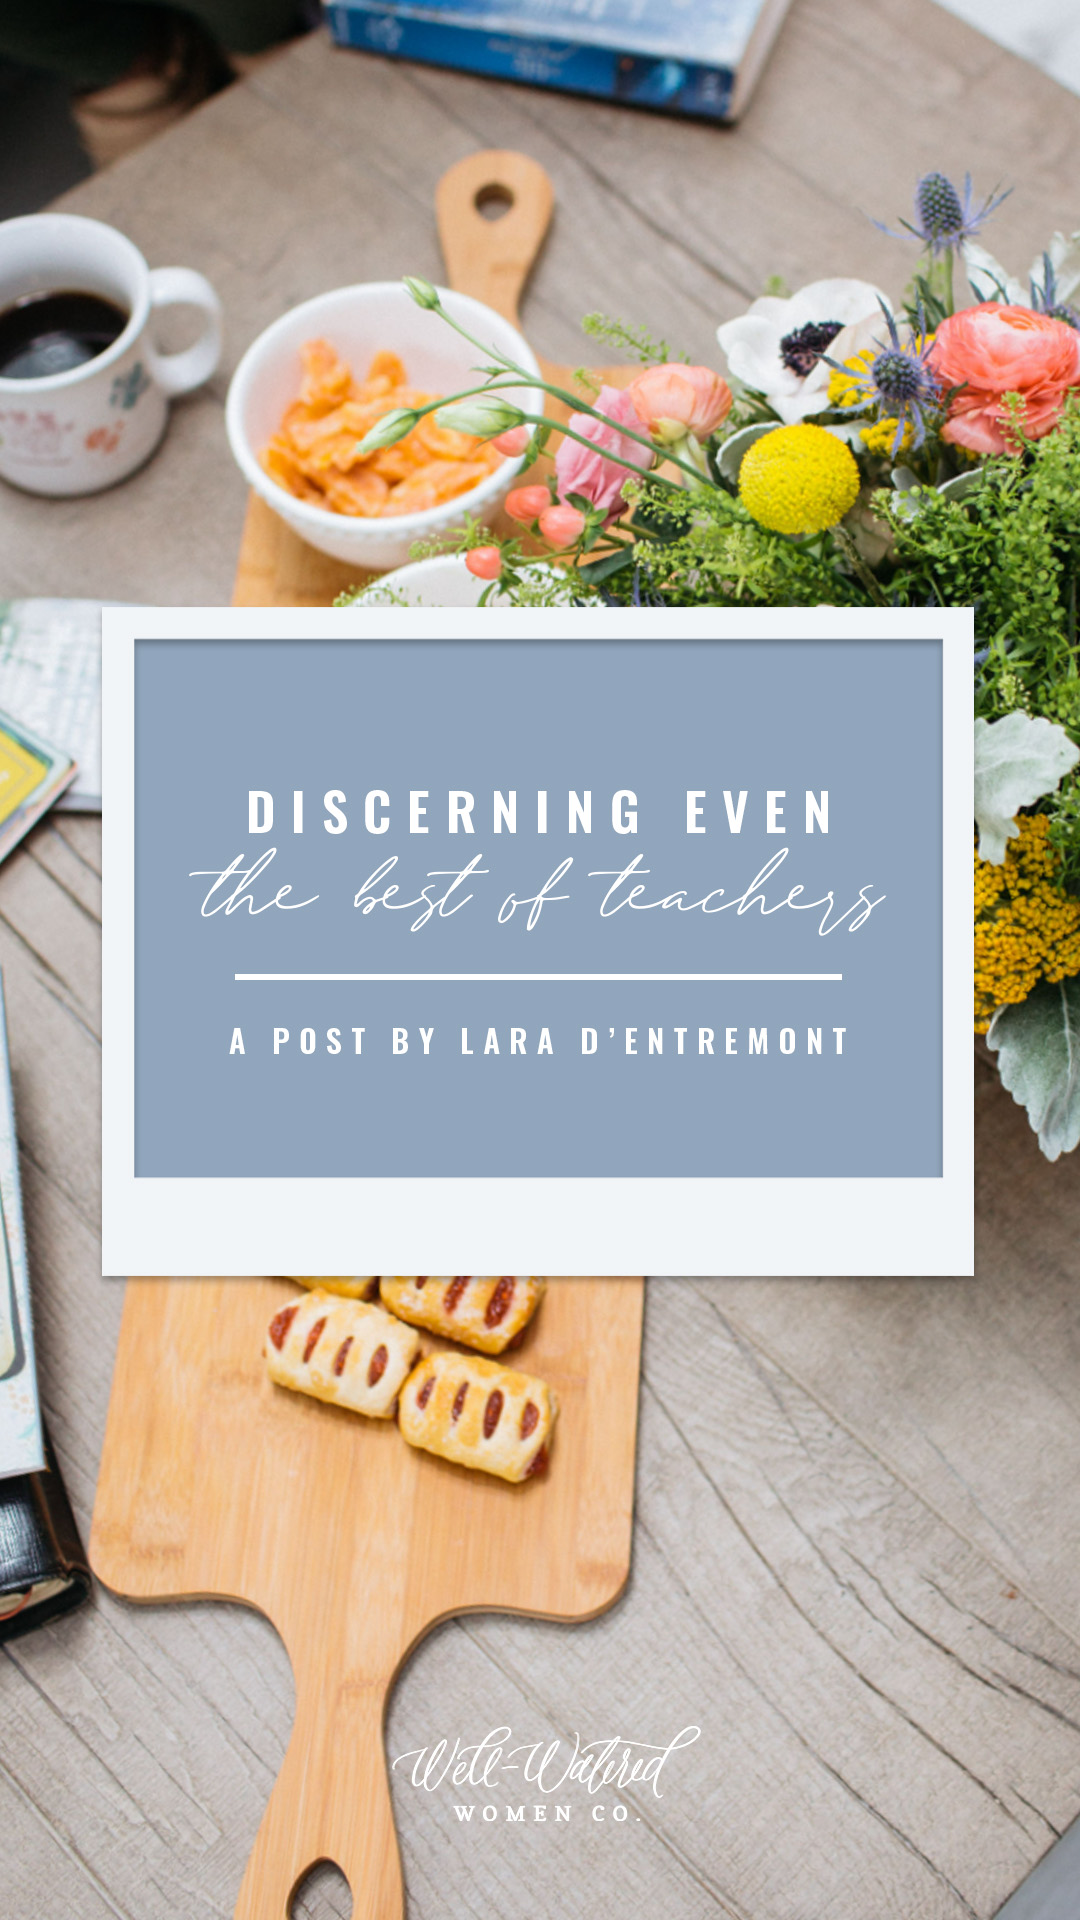 Well-Watered Women Blog - Discerning Even the Best of Teachers by Lara D'entremont